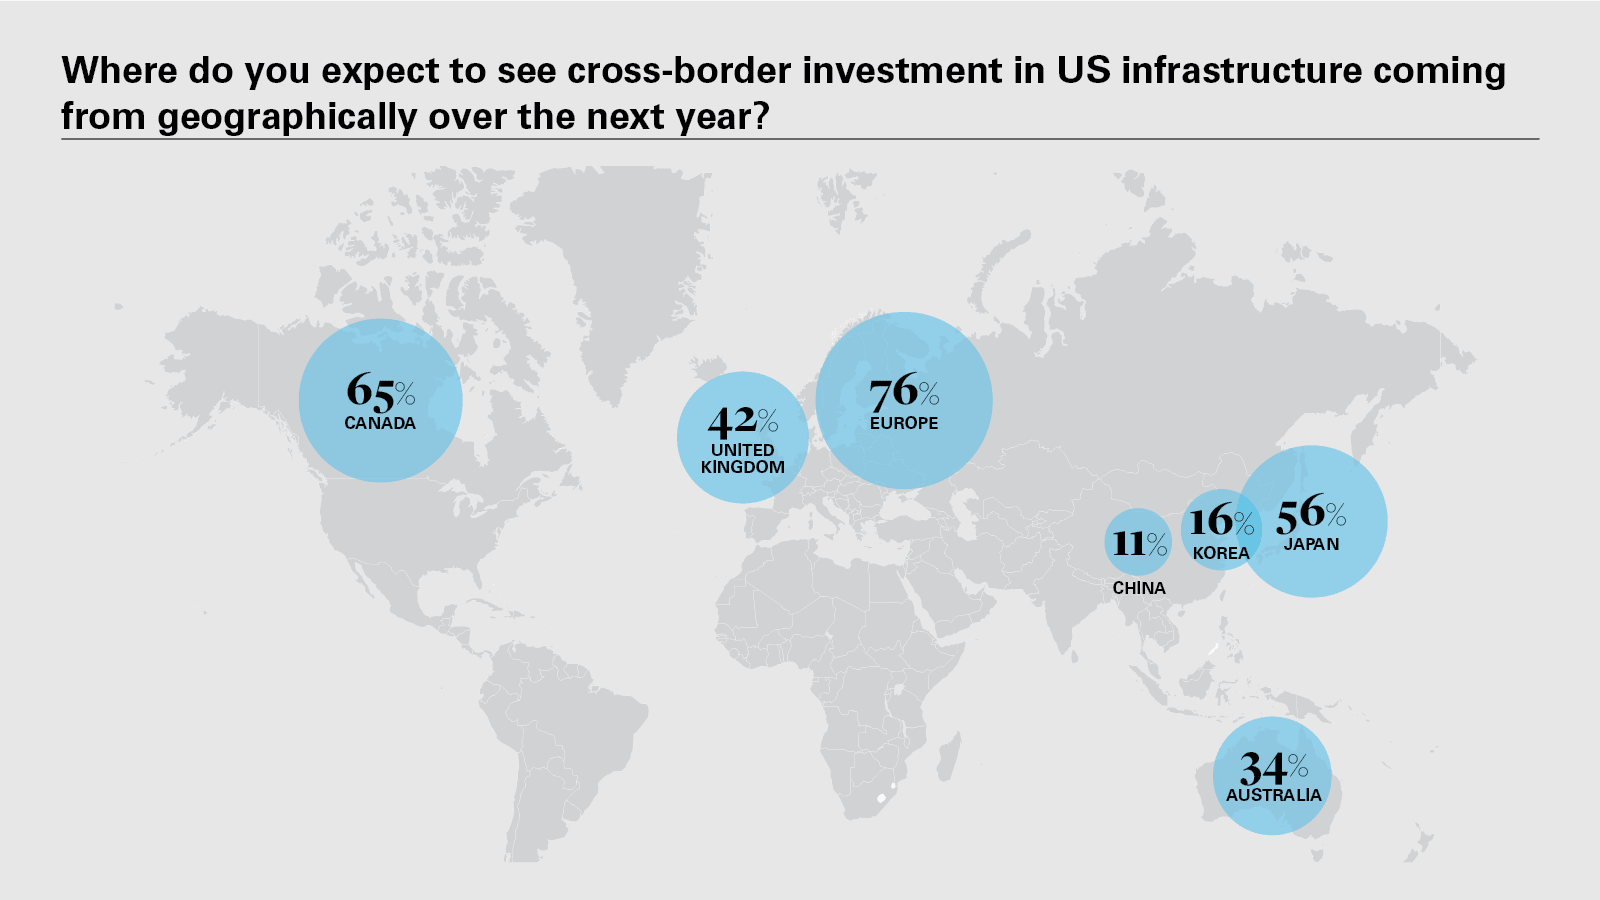 Where do you expect to see cross-border investment in US infrastructure coming from geographically over the next year?